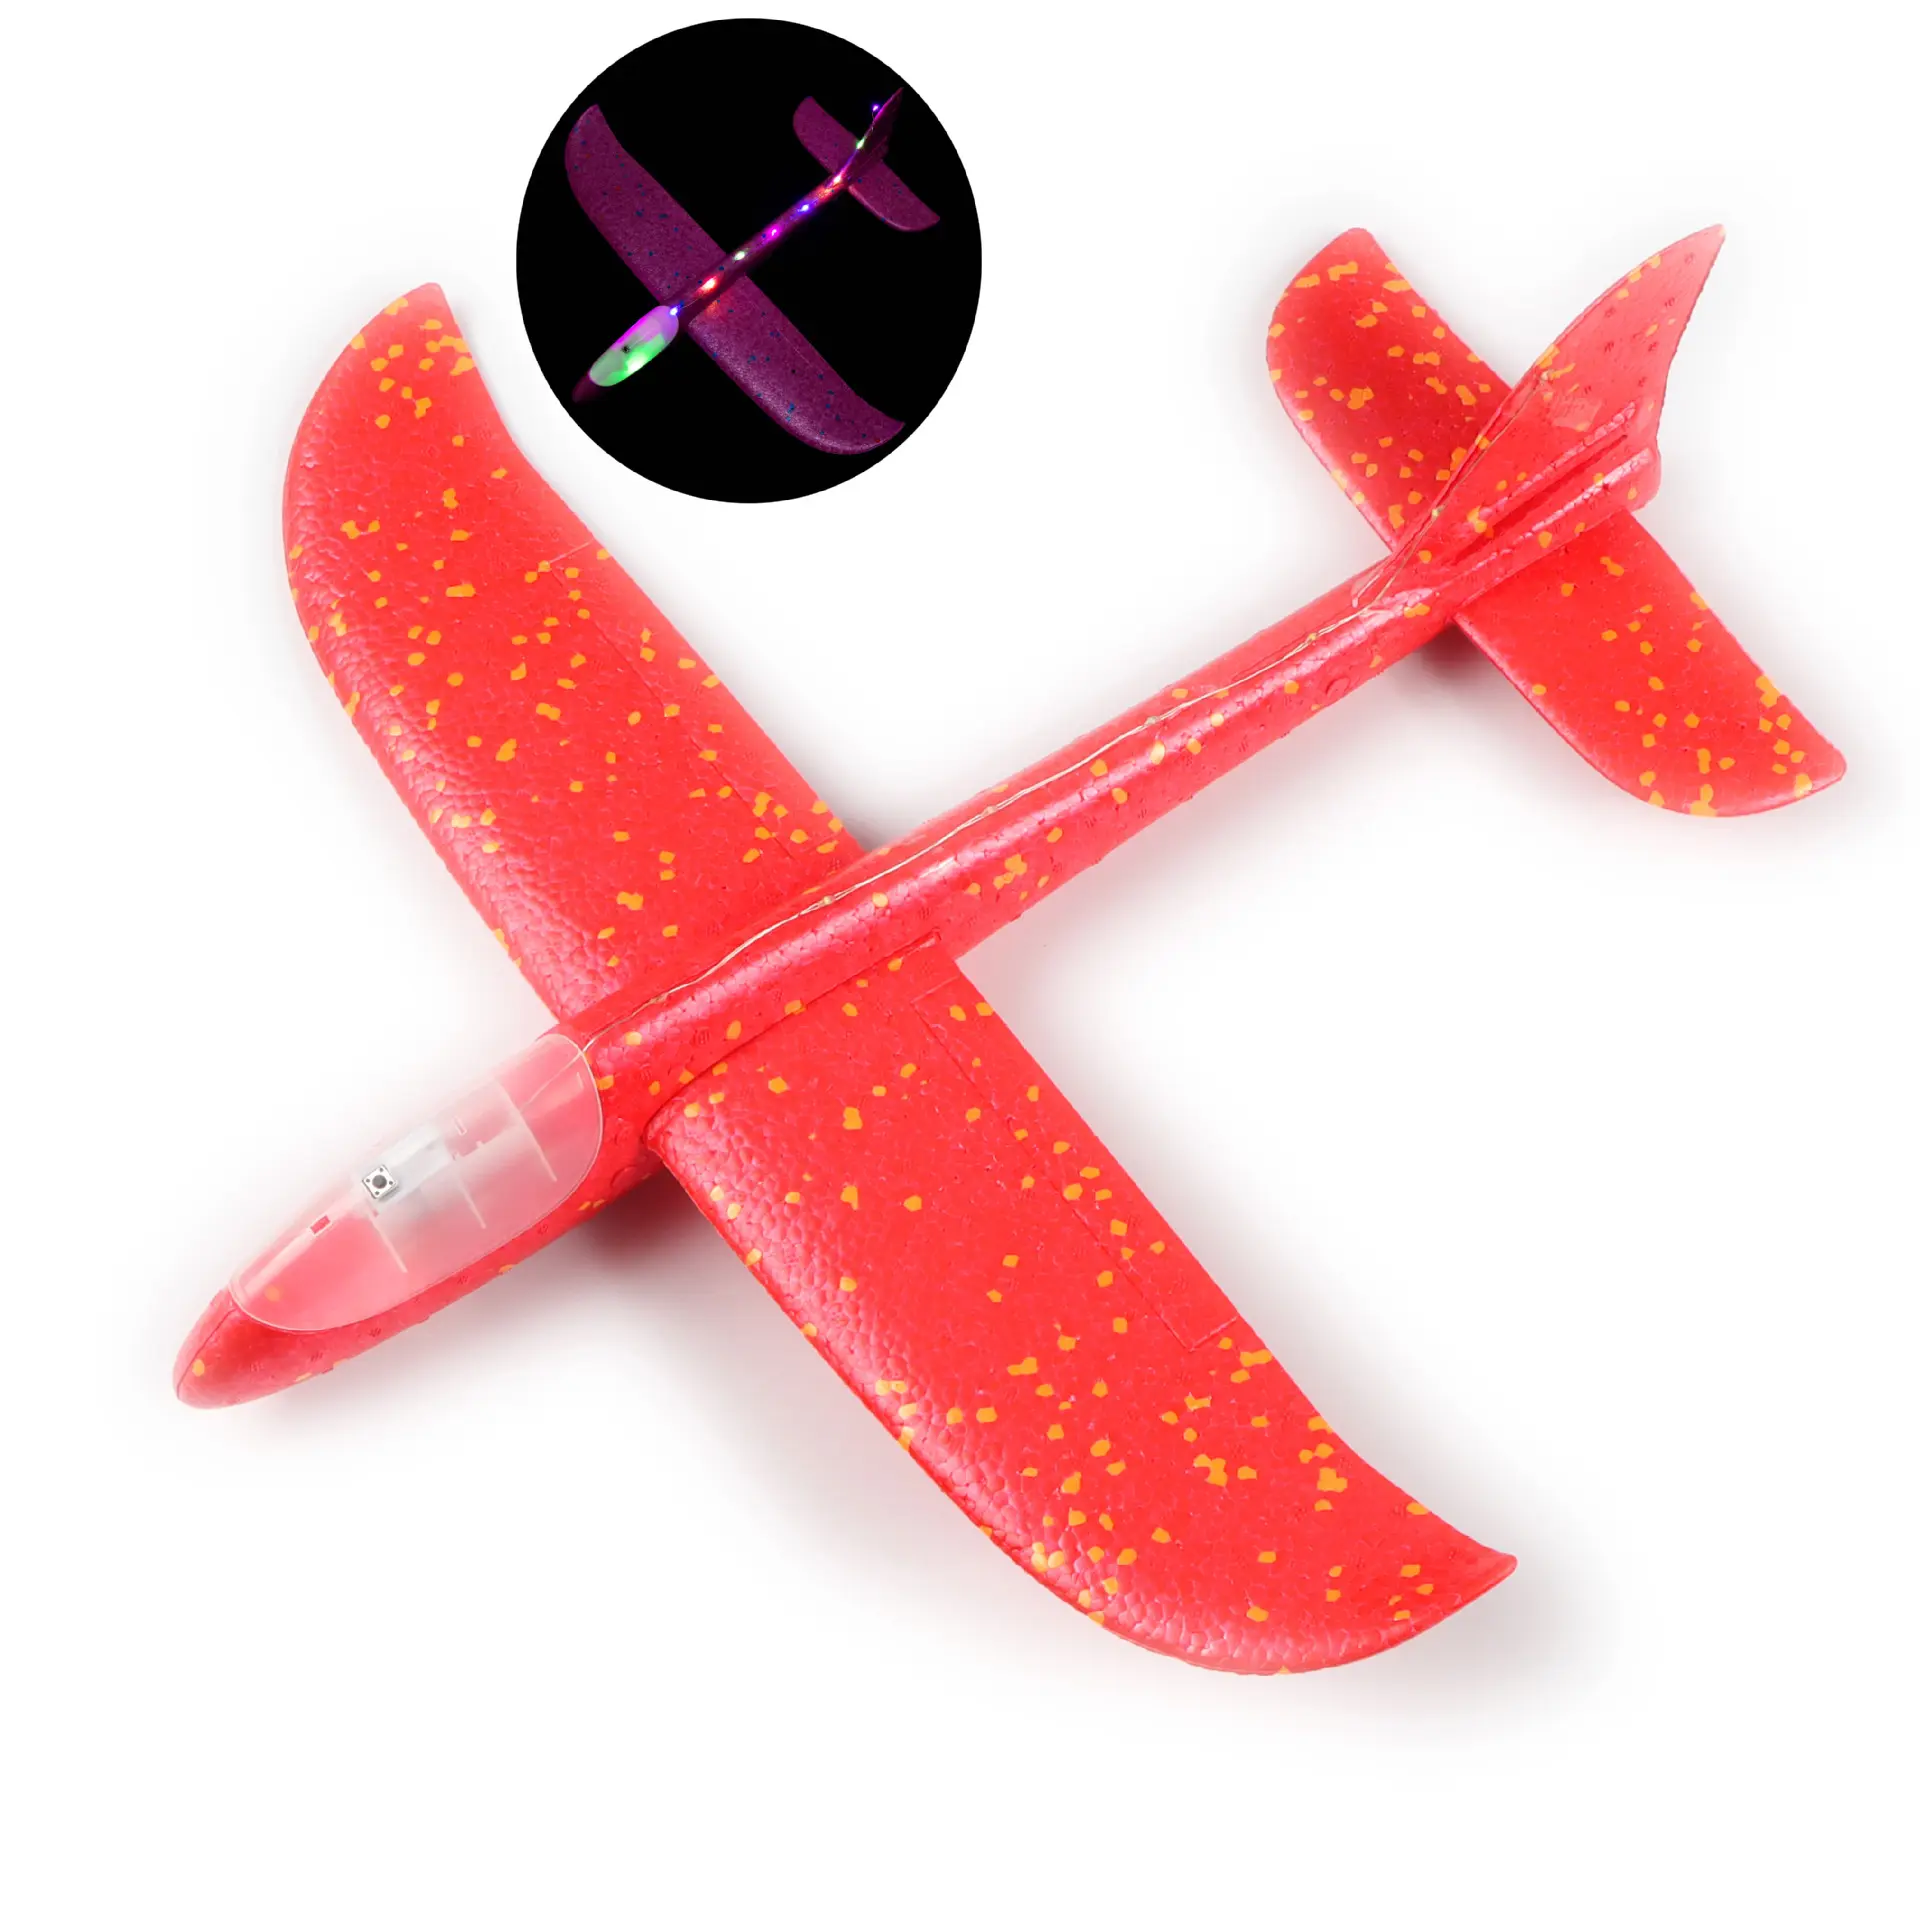 Flashing Glider Plane Illuminated Colored led Lights can Play at Night Foam Airplane The Best Airplane Toy For Child